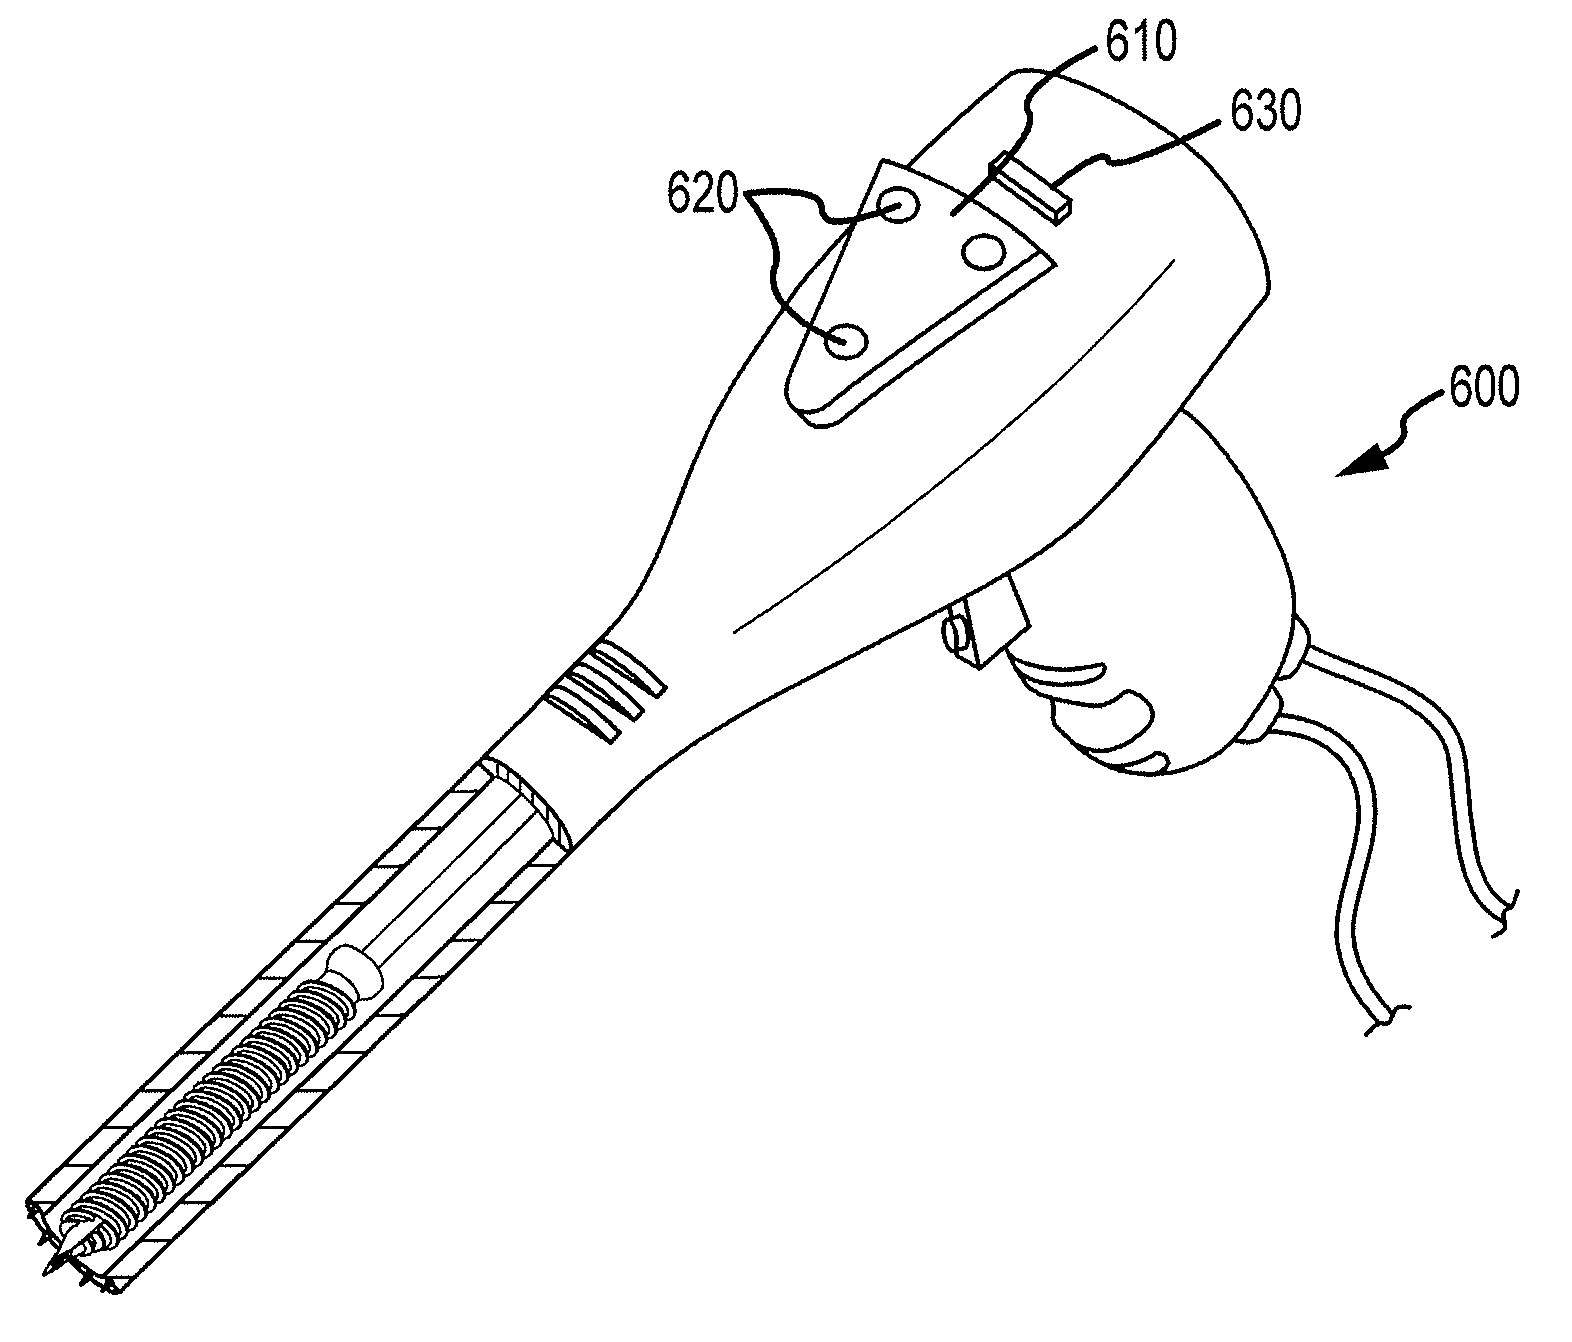 Image-Guided Minimal-Step Placement Of Screw Into Bone